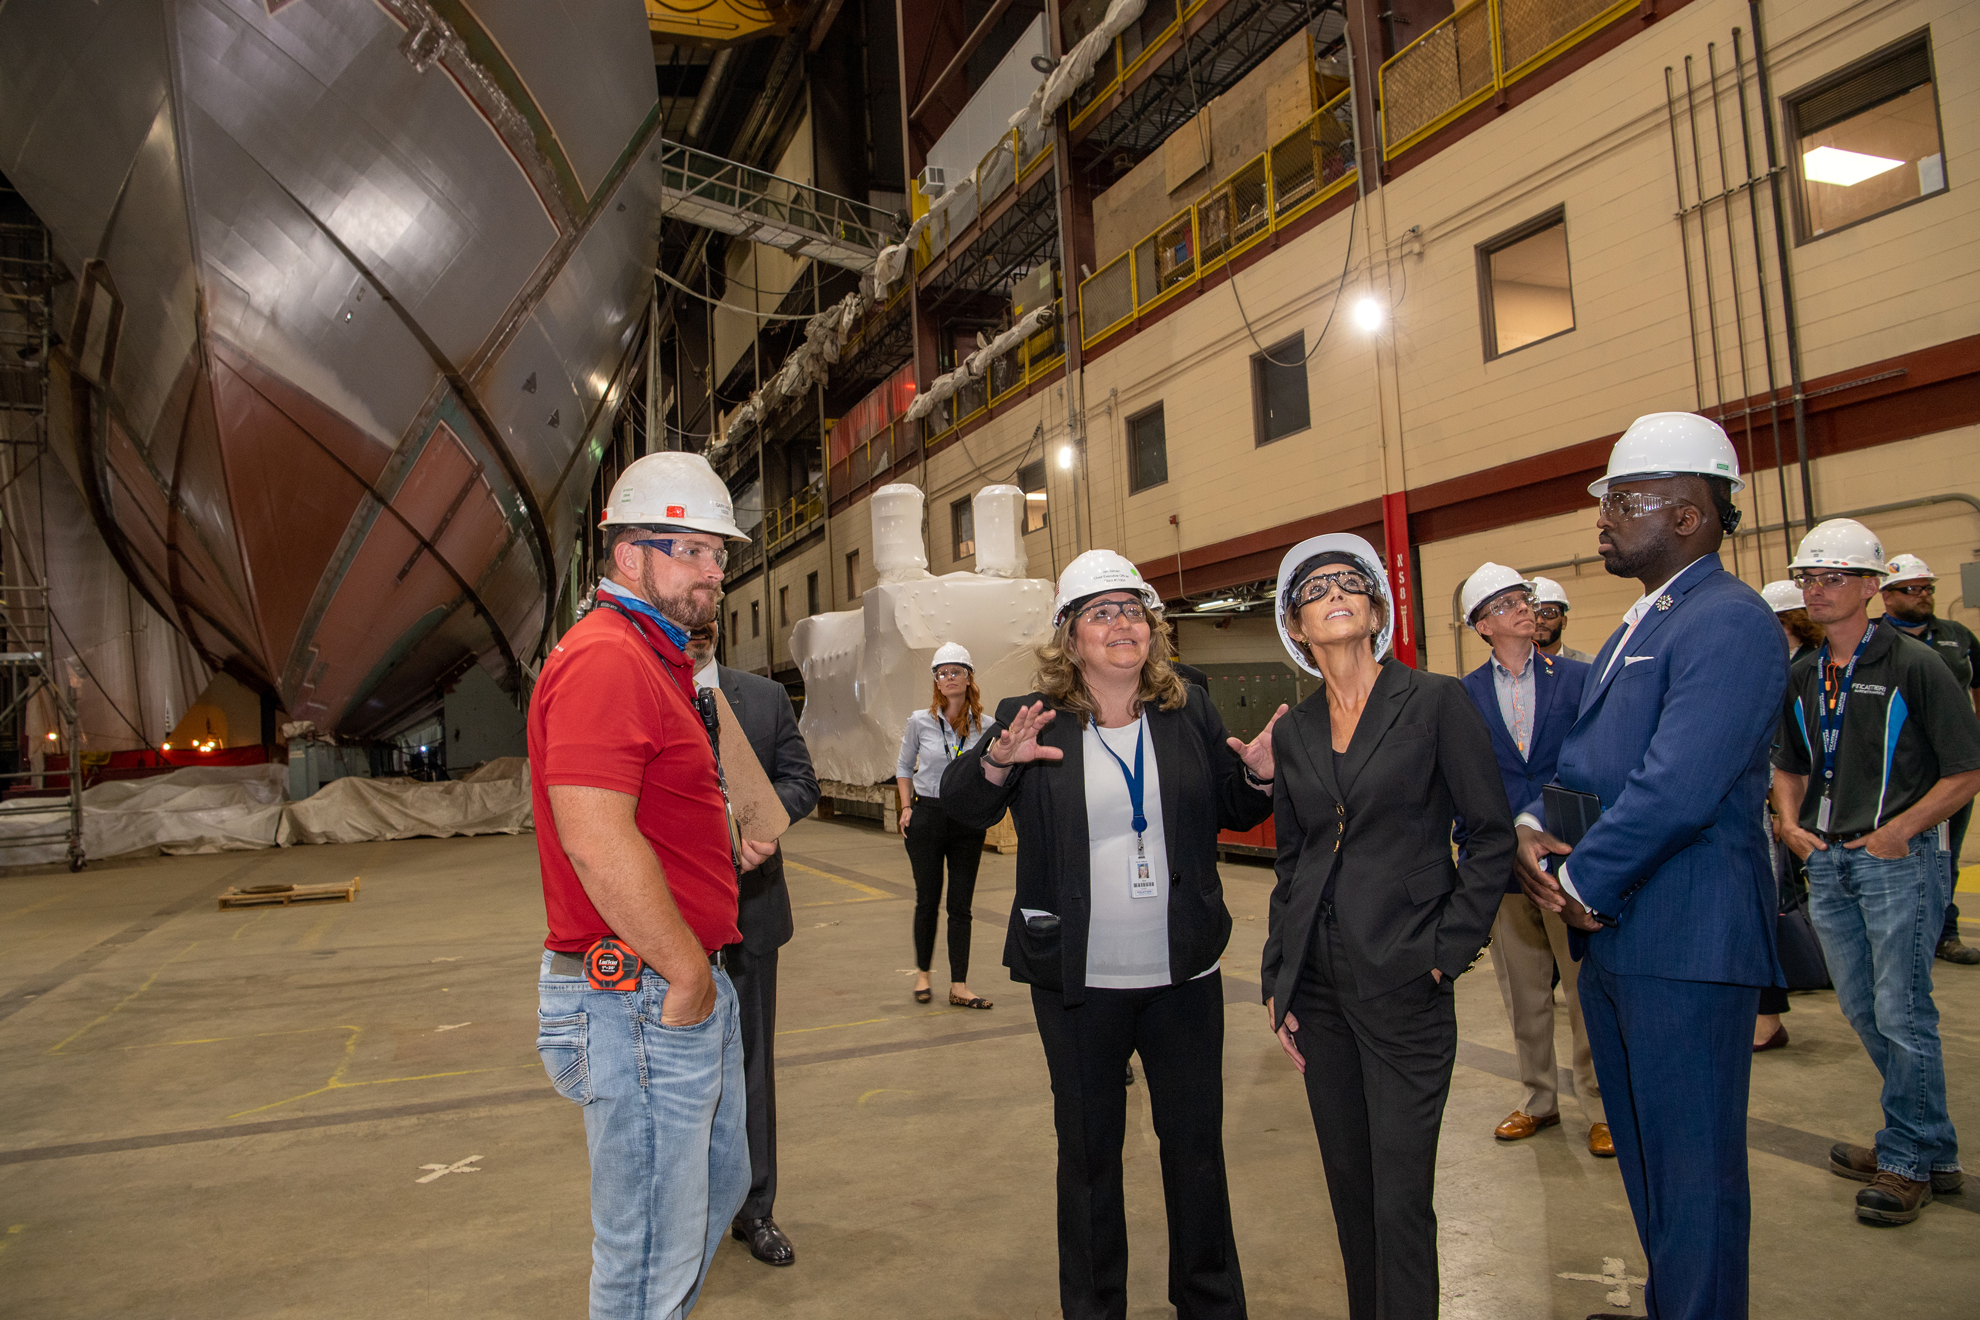 Jan Allman, CEO of Fincantieri Marinette Marine (FMM) and Robyn Modly, Ship Sponsor for Littoral Combat Ship (LCS) 31, the future USS Cleveland, tour Fincantieri Marinette Marine's shipyard.